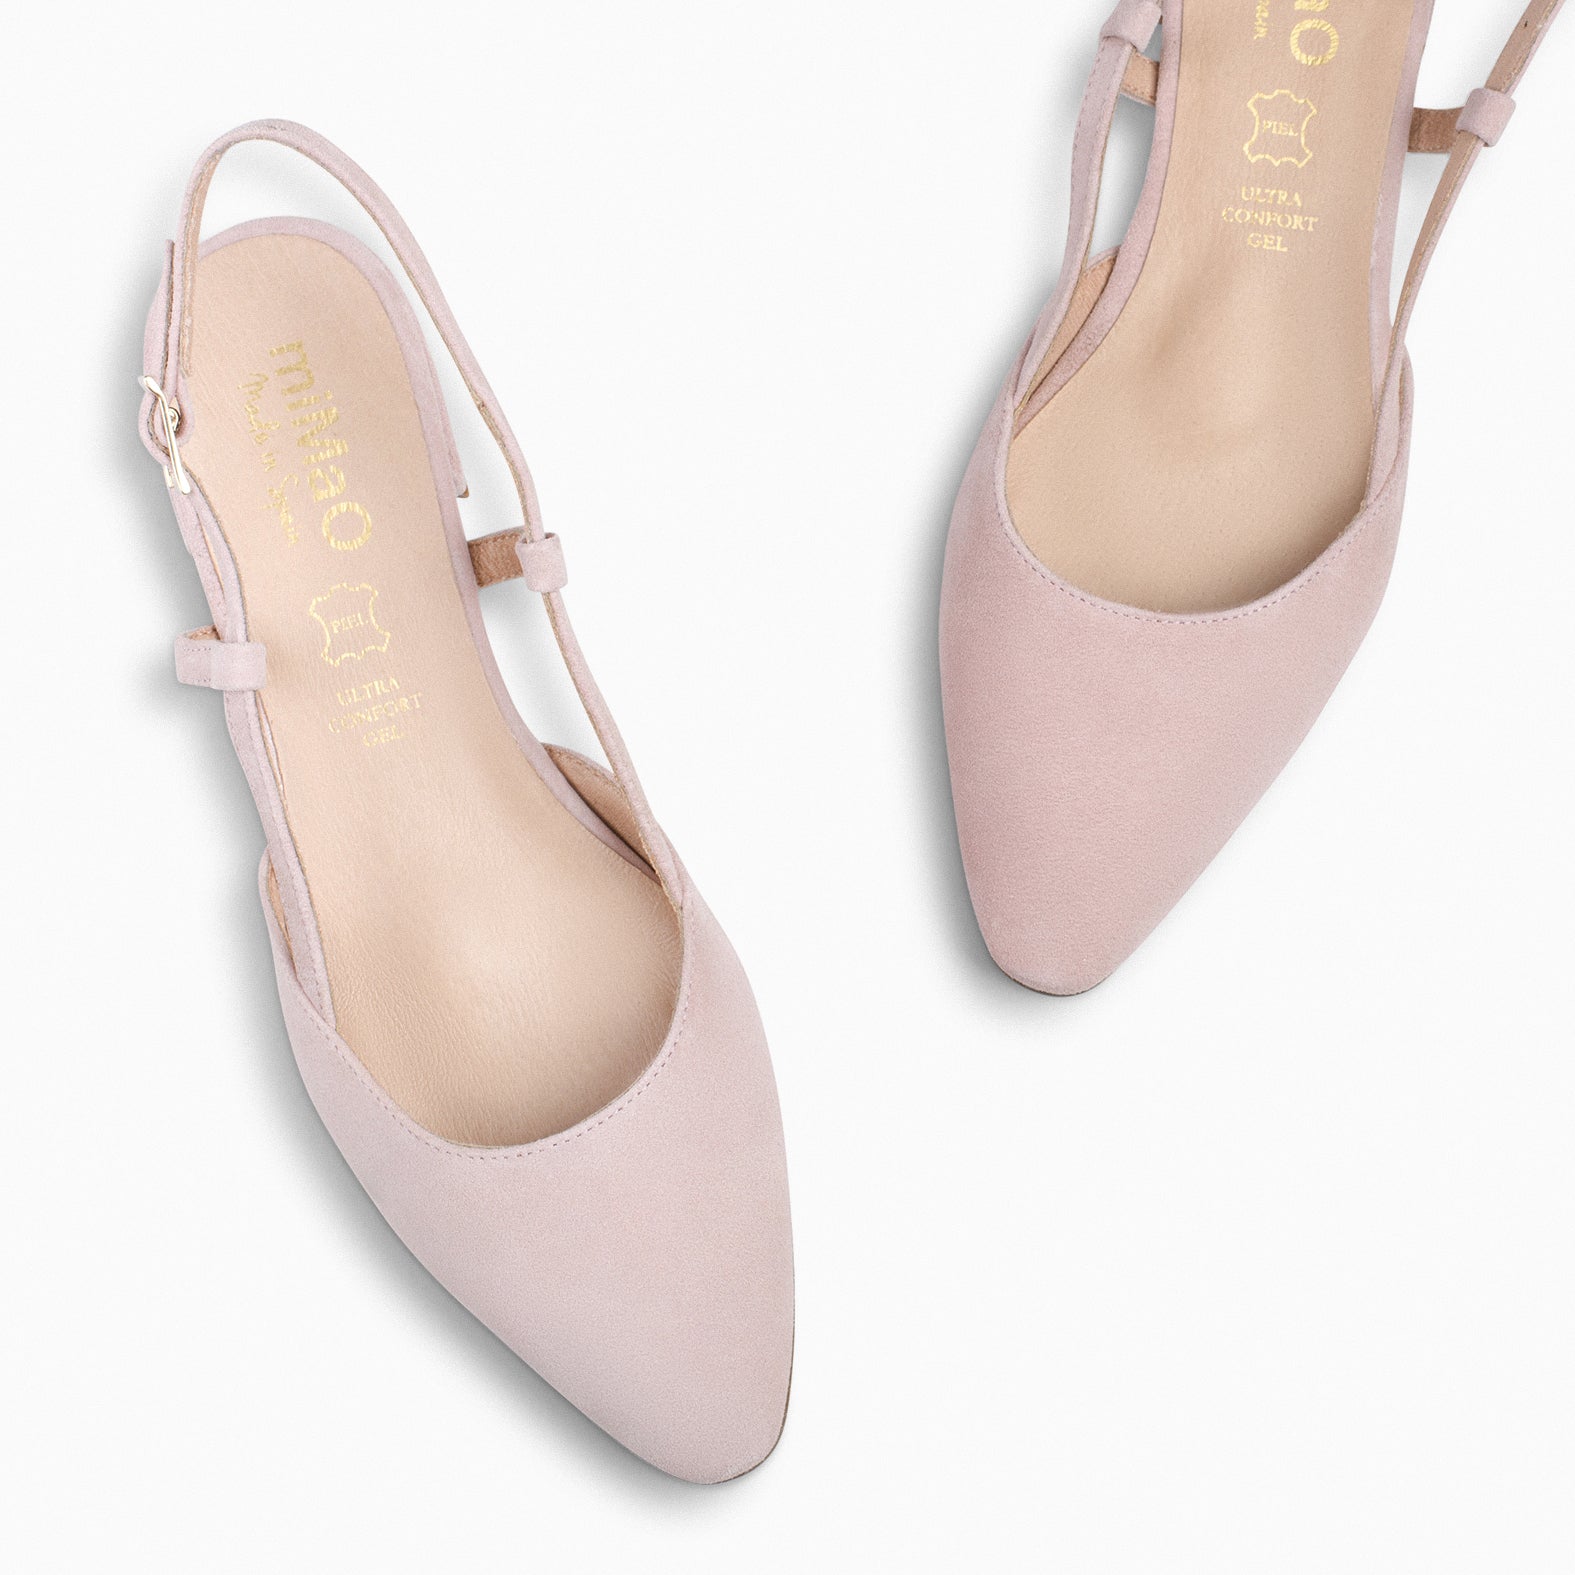 BRUNCH – Chaussures Slingbacks plates NUDE